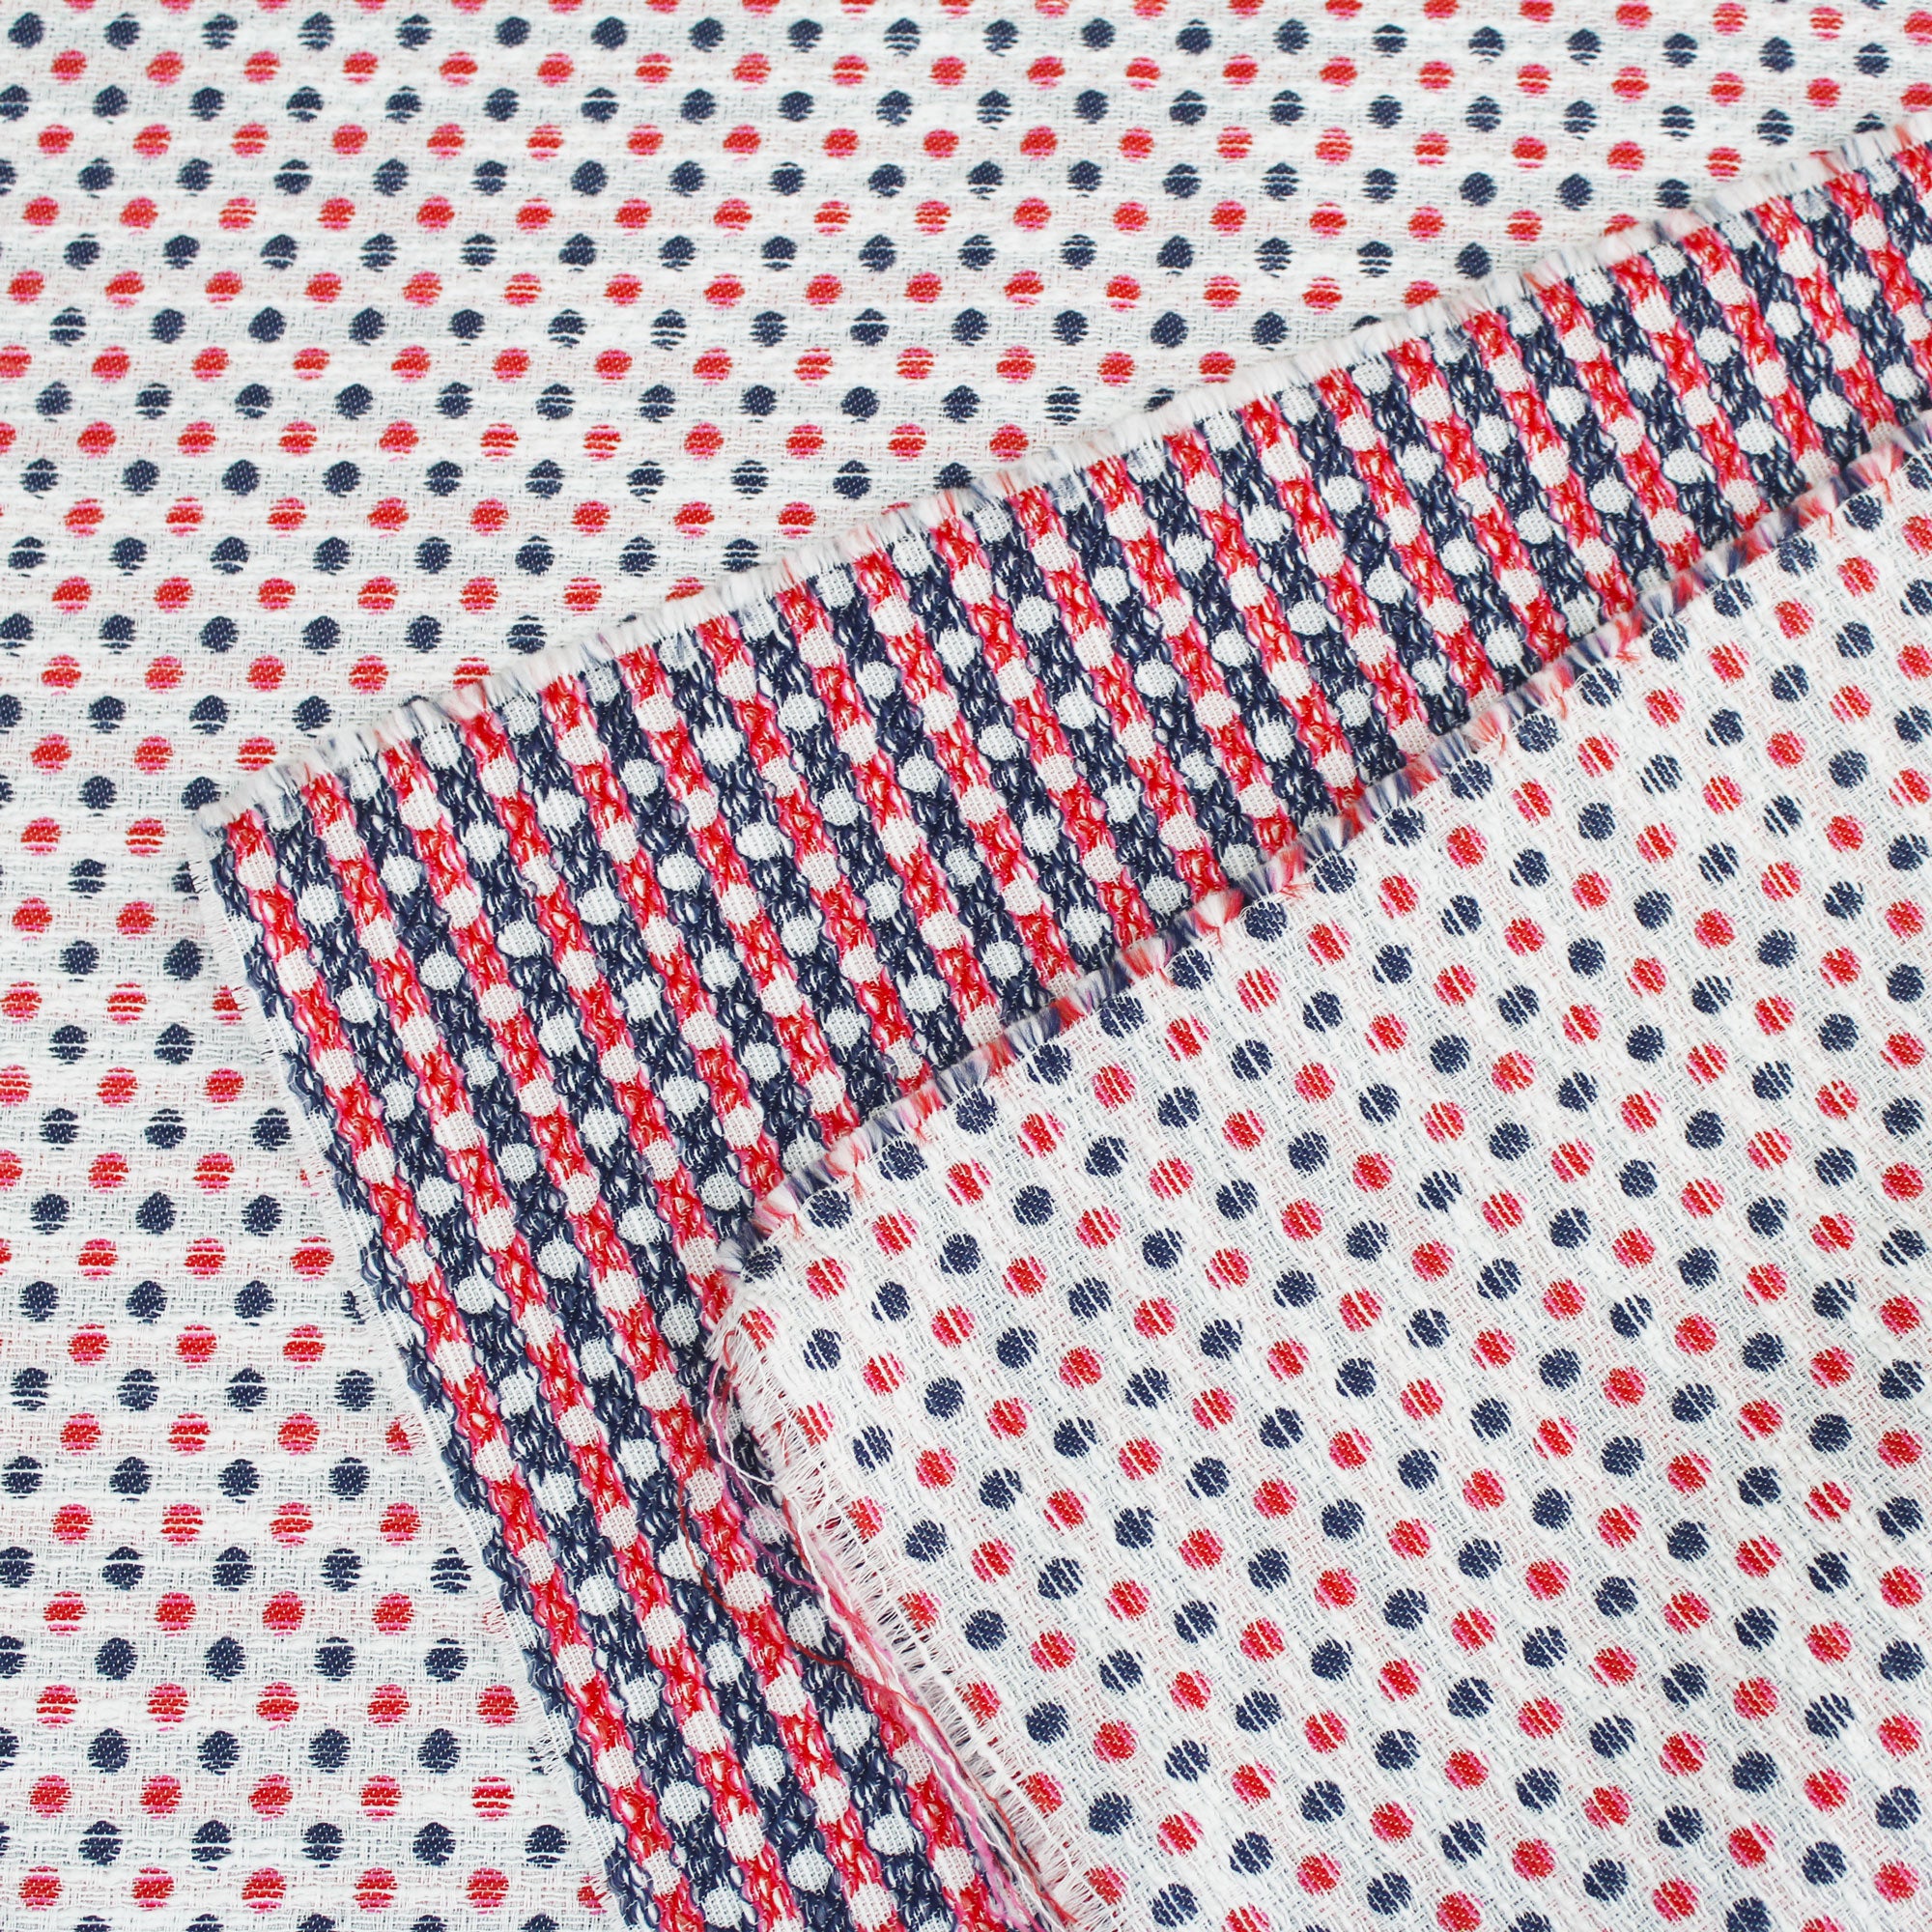 Cotton jacquard fabric with red and blue dots